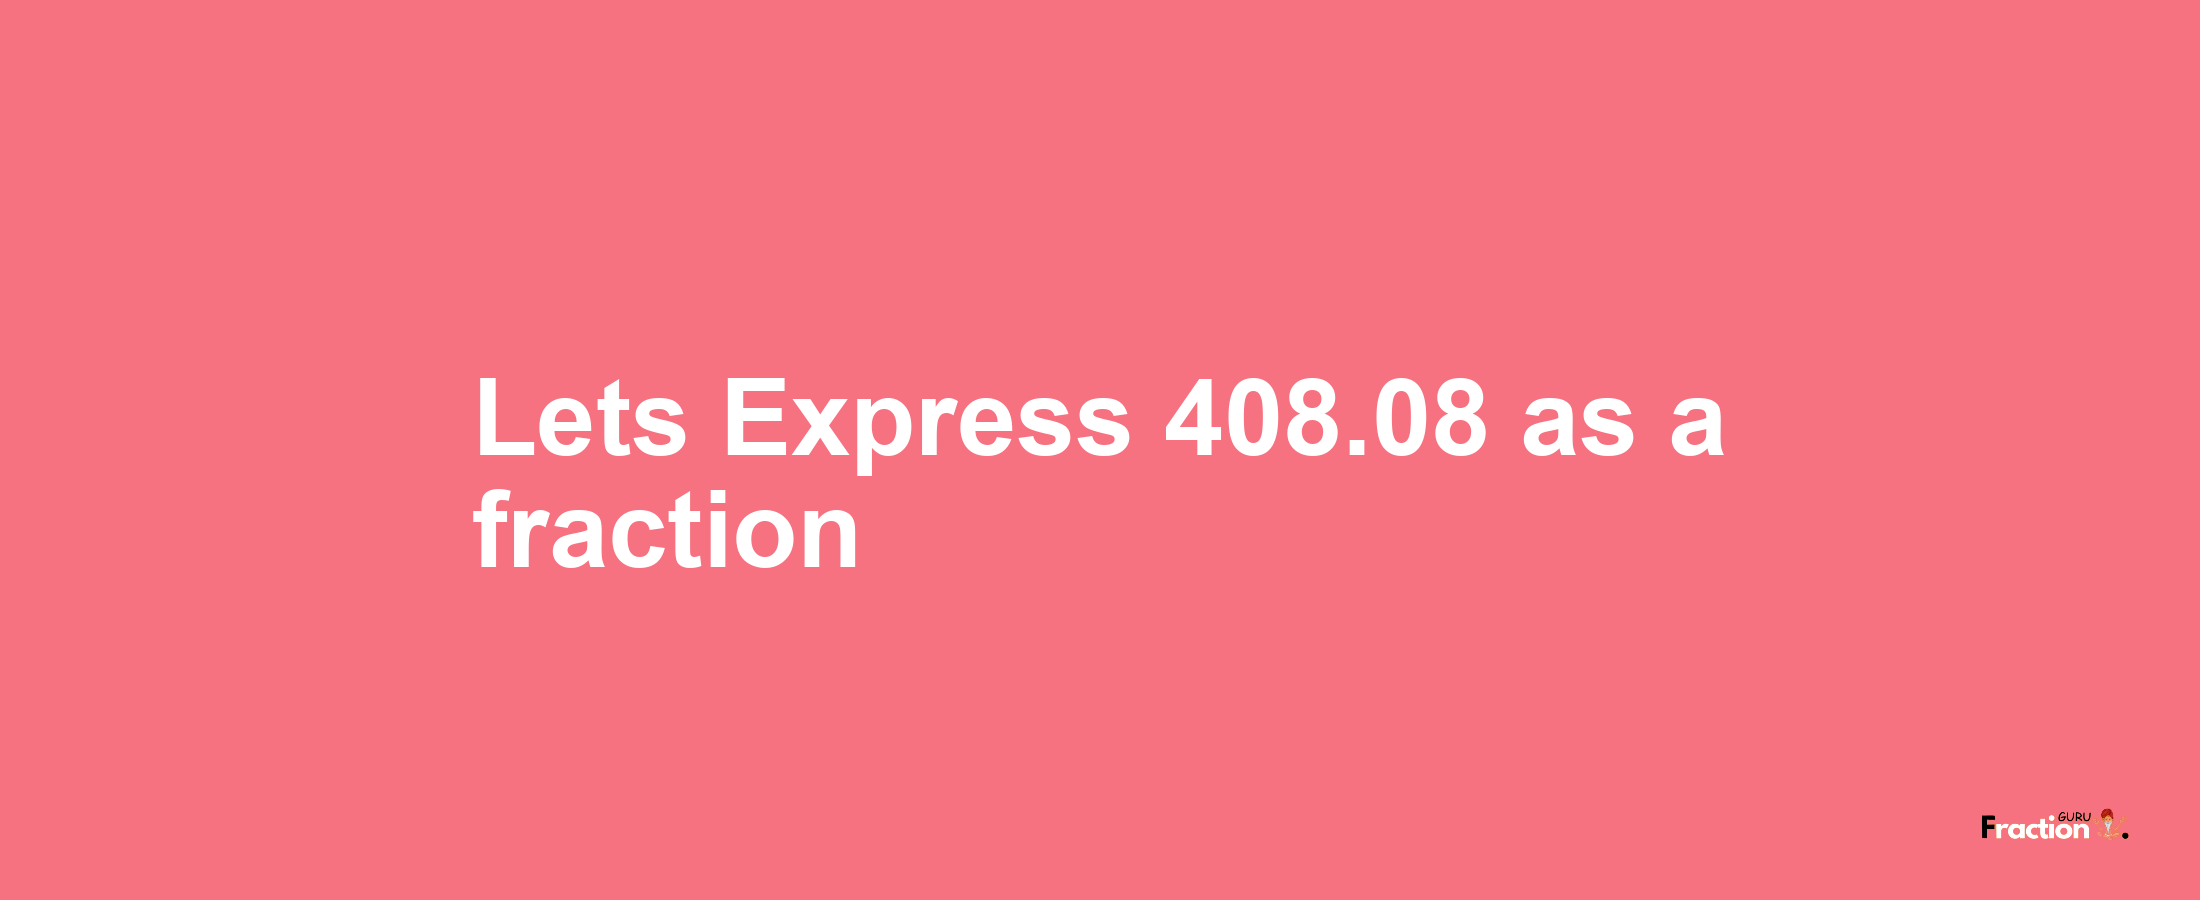 Lets Express 408.08 as afraction